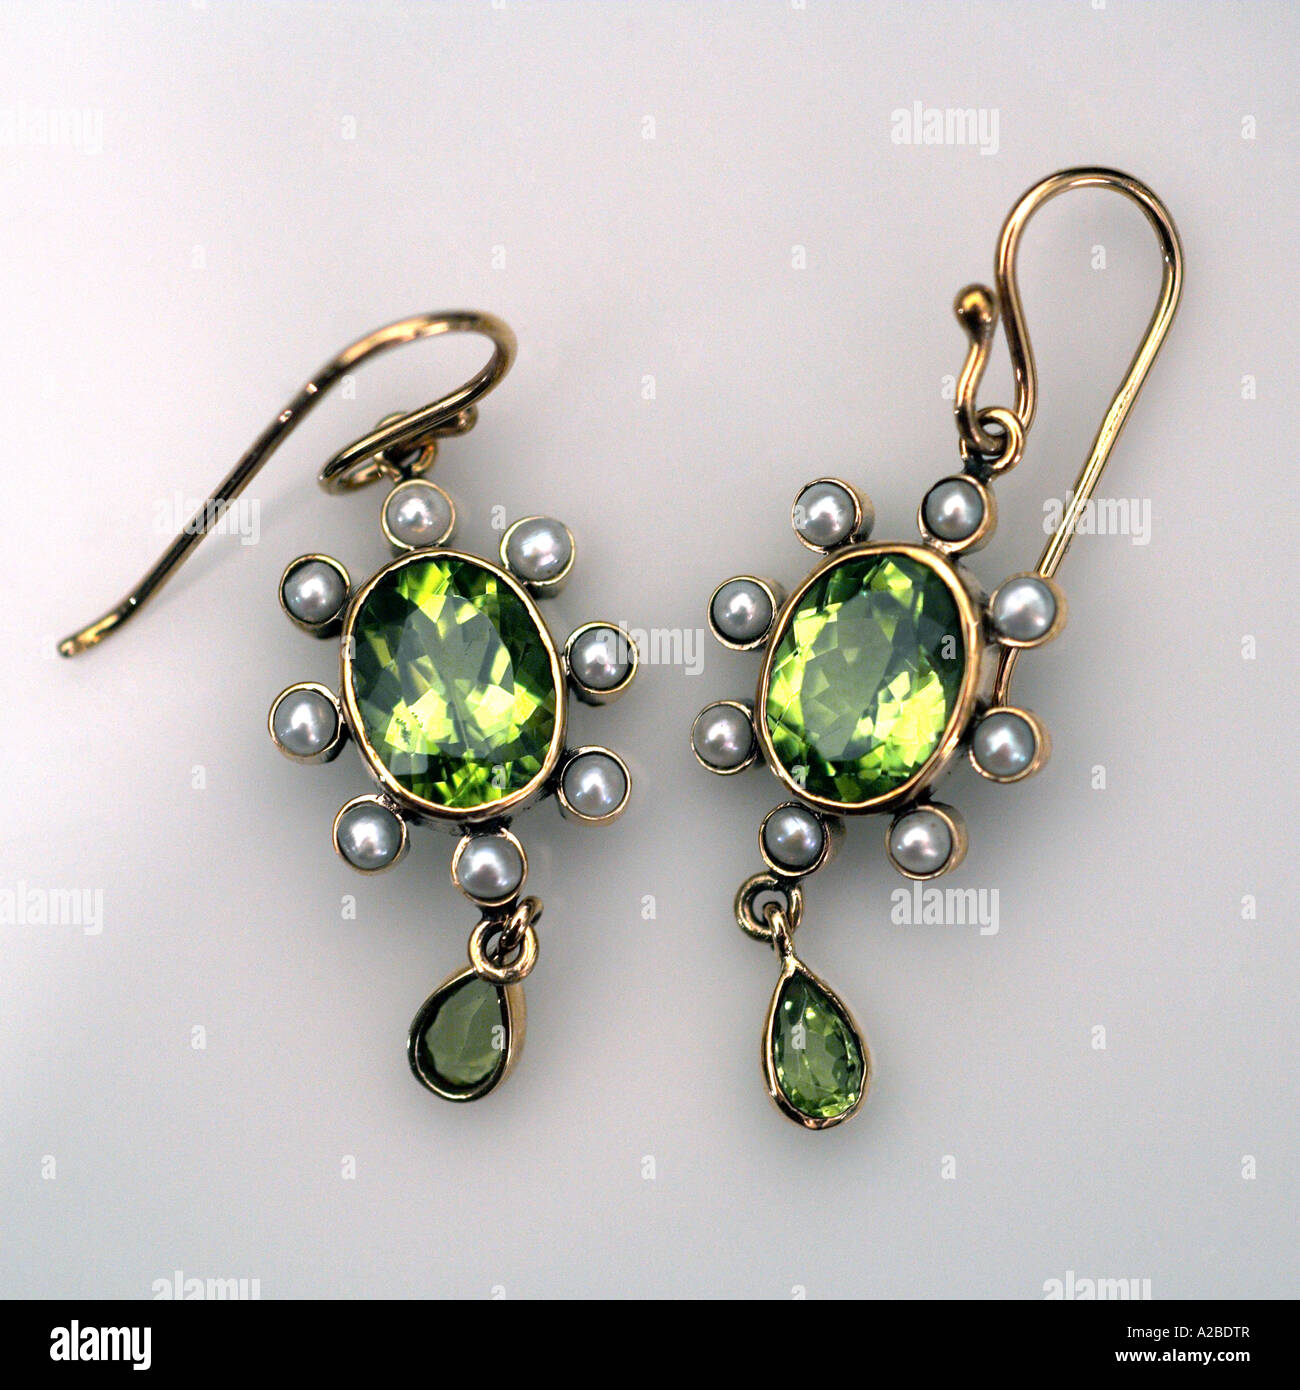 Vintage Peridot and Cultured Pearls Gold Earrings Stock Photo